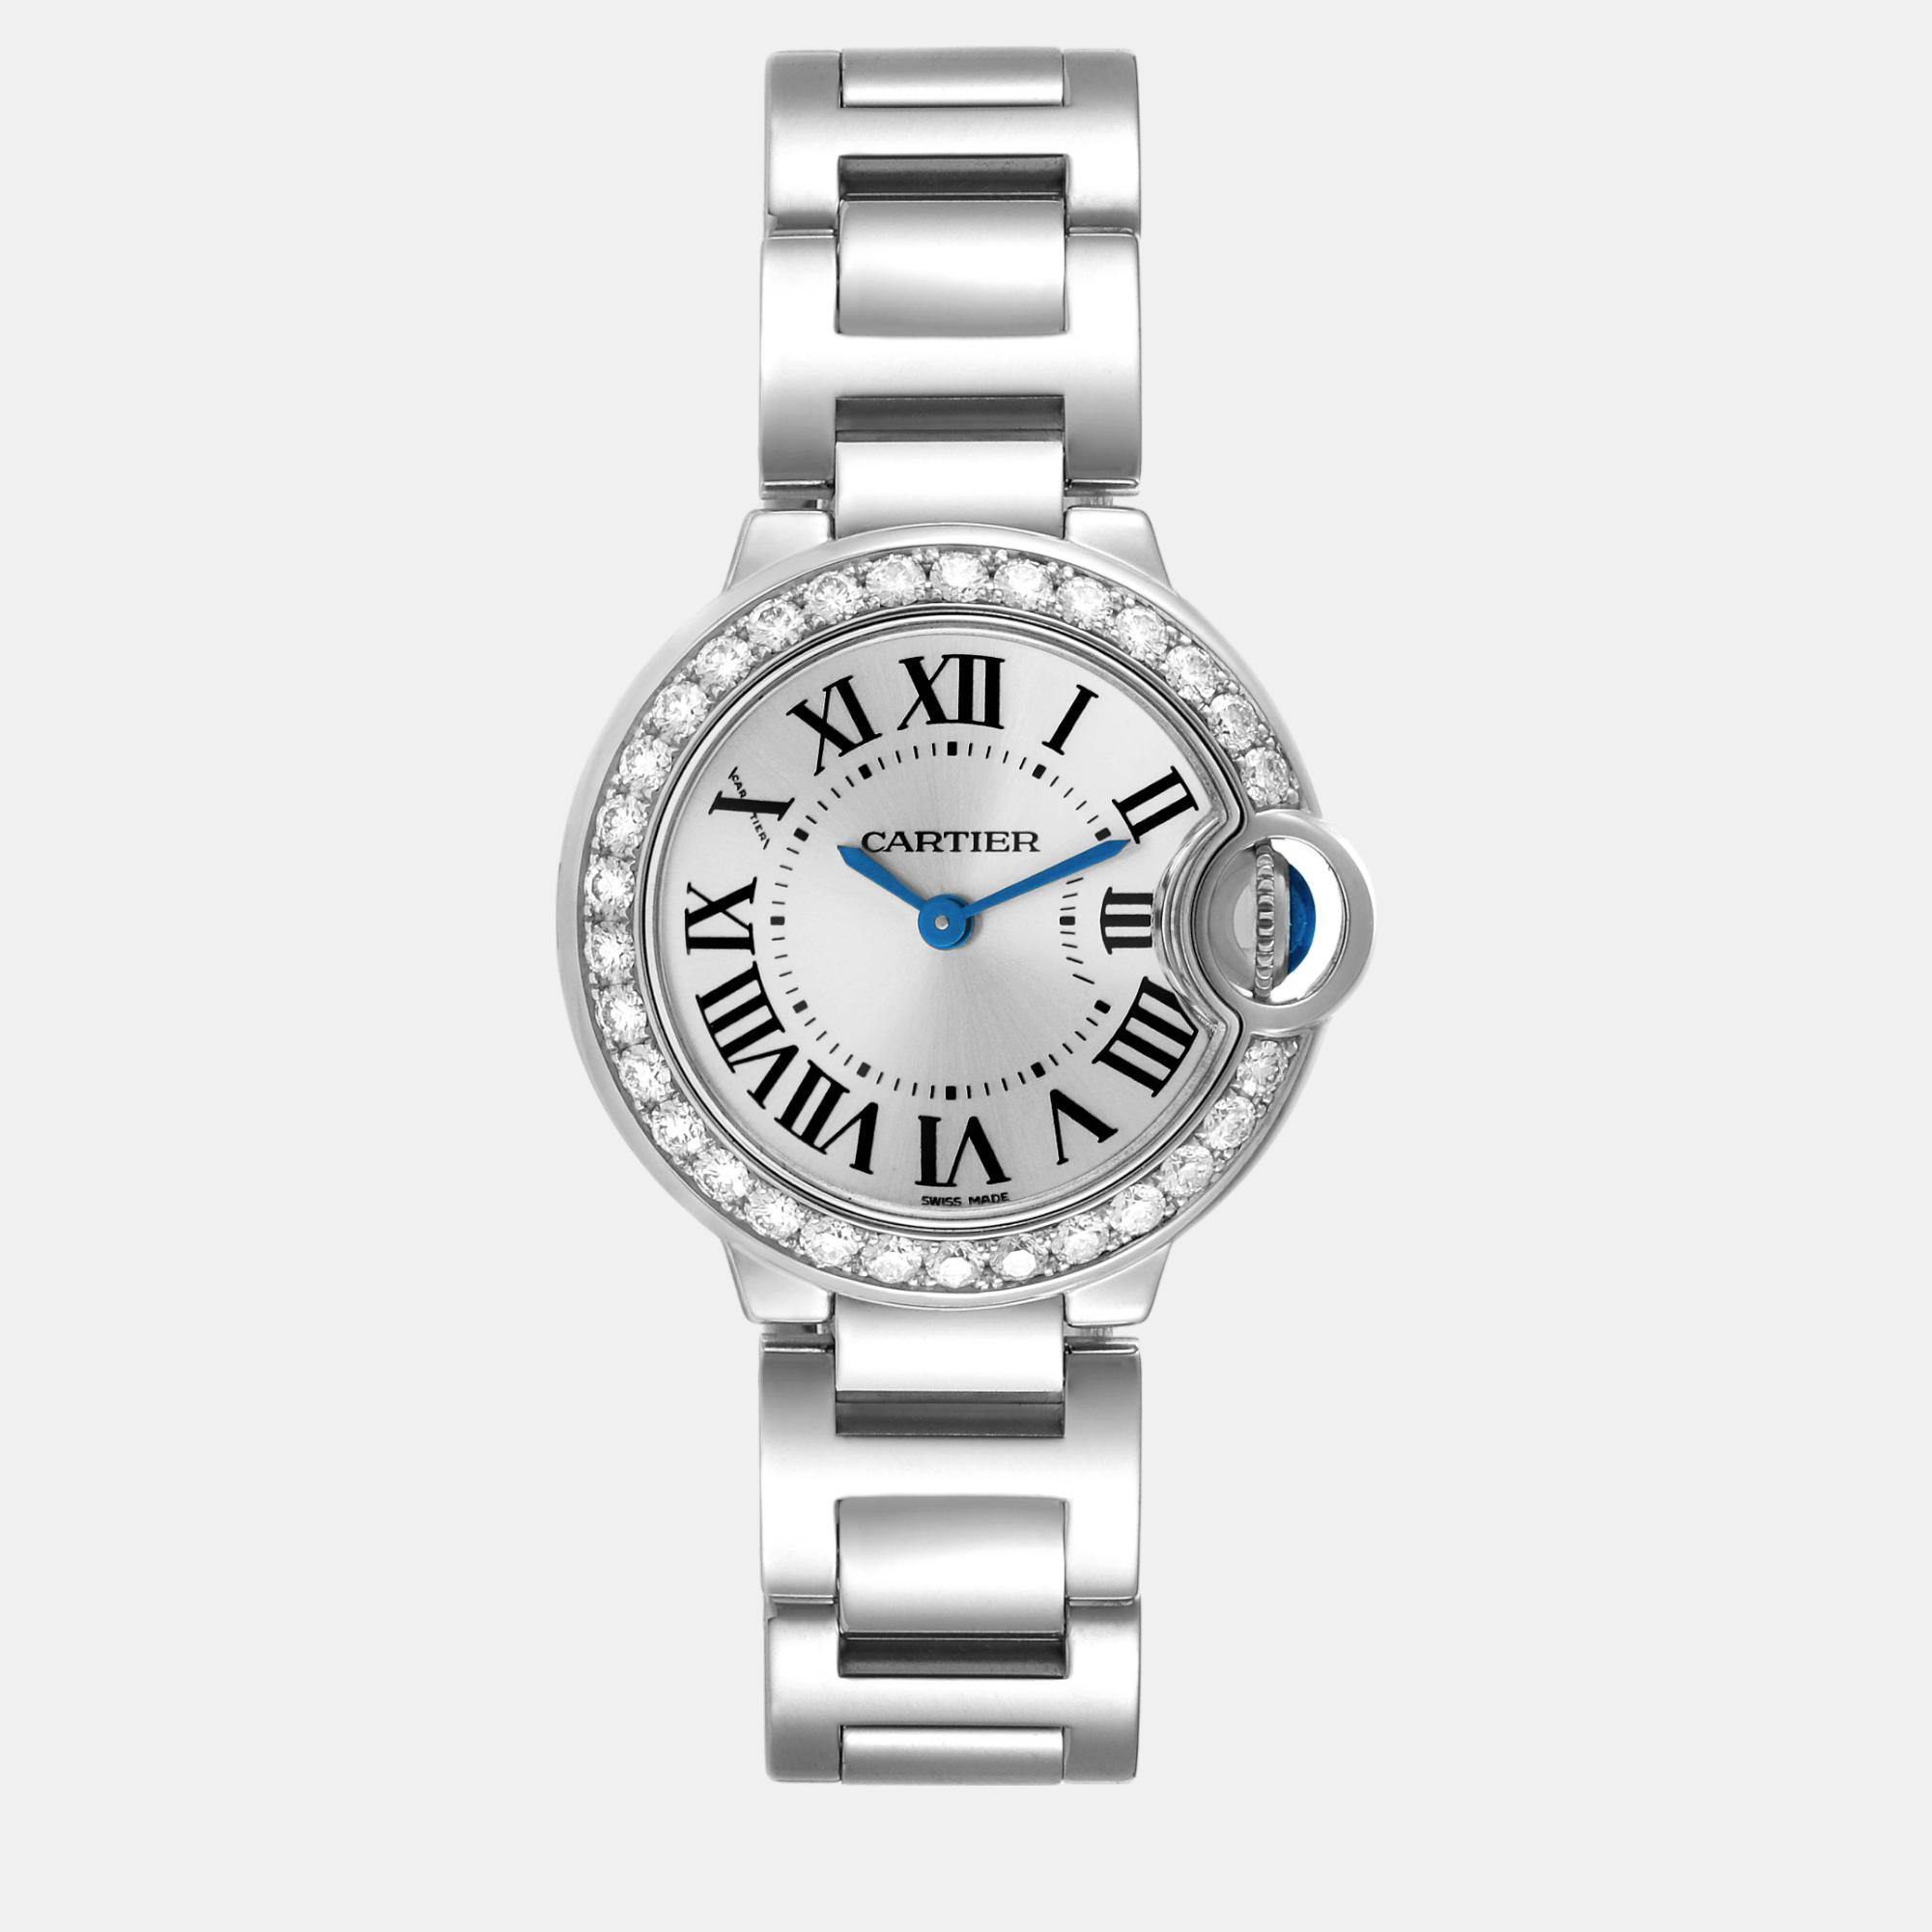 This authentic Cartier watch is characterized by skillful craftsmanship and understated charm. Meticulously constructed to tell time in an elegant way it comes in a sturdy case and flaunts a seamless blend of innovative design and flawless style.